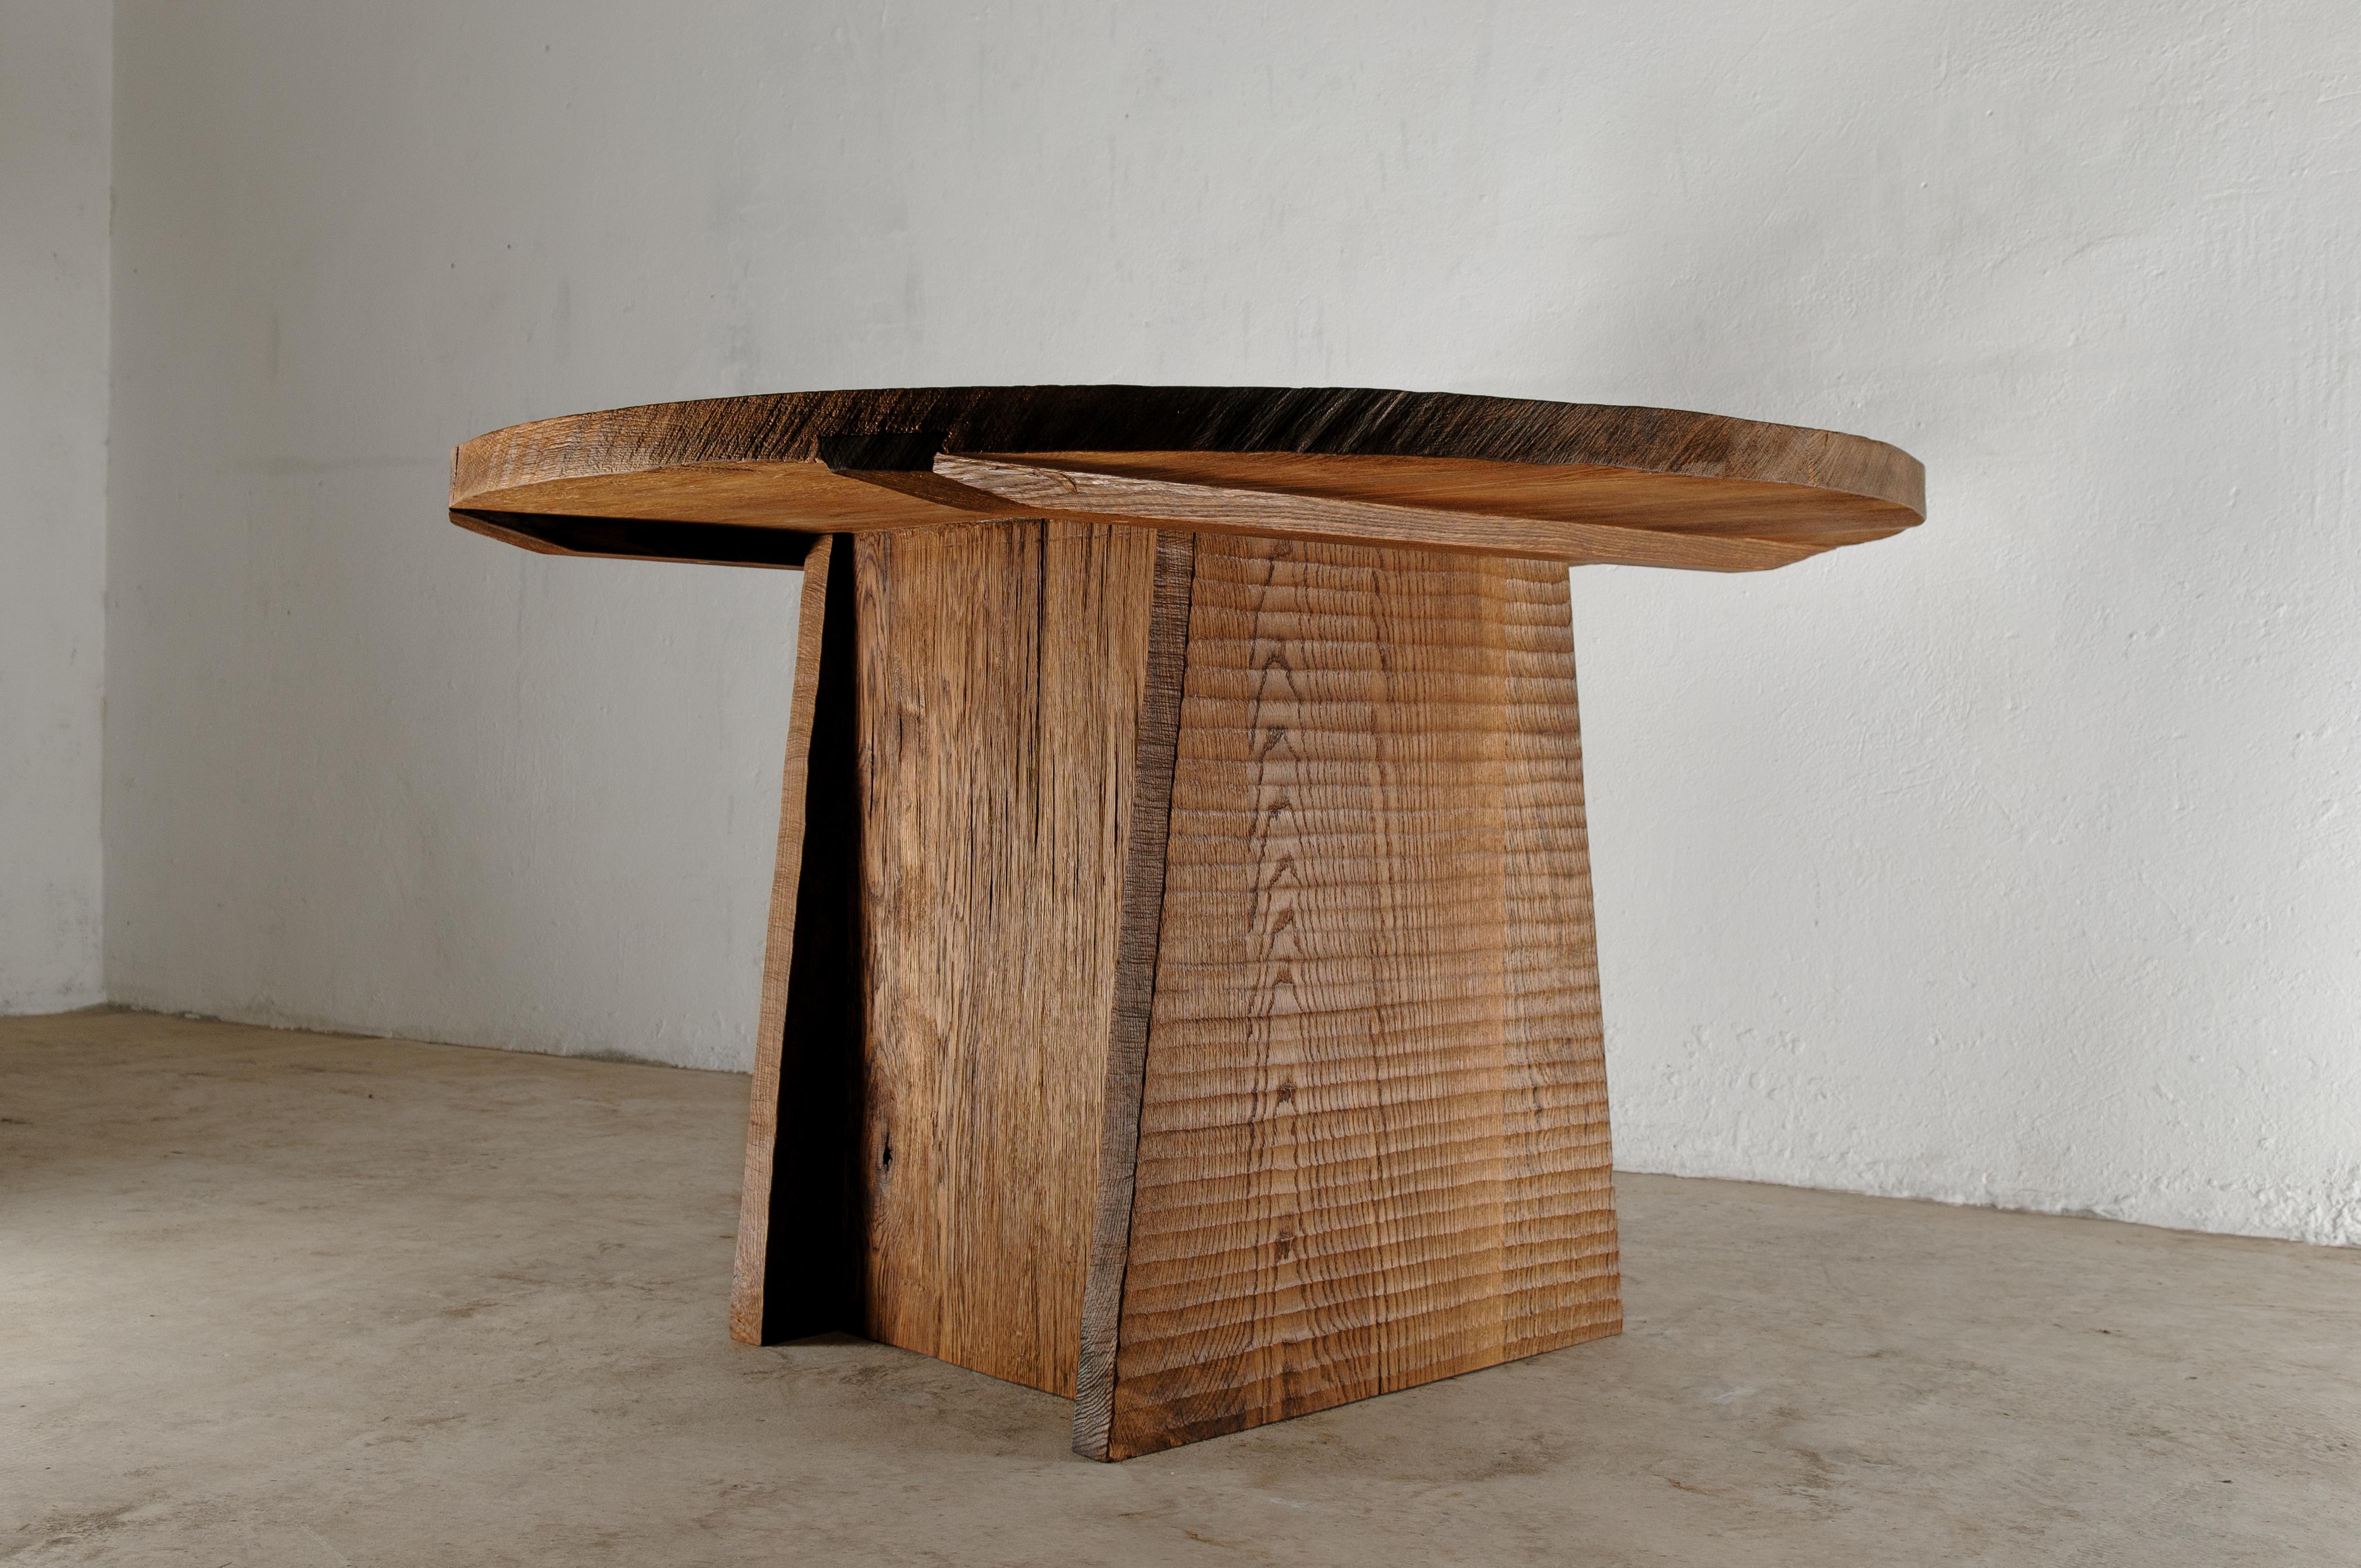 Brutalist center table N2 in Solid Oakwood

Dimensions: 
D. 100 x H. 76 cm

Unique piece made to order.

Founded by artist Denis Milovanov, SÓHA design studio conceives and produces furniture design and decorative objects in solid oak in an